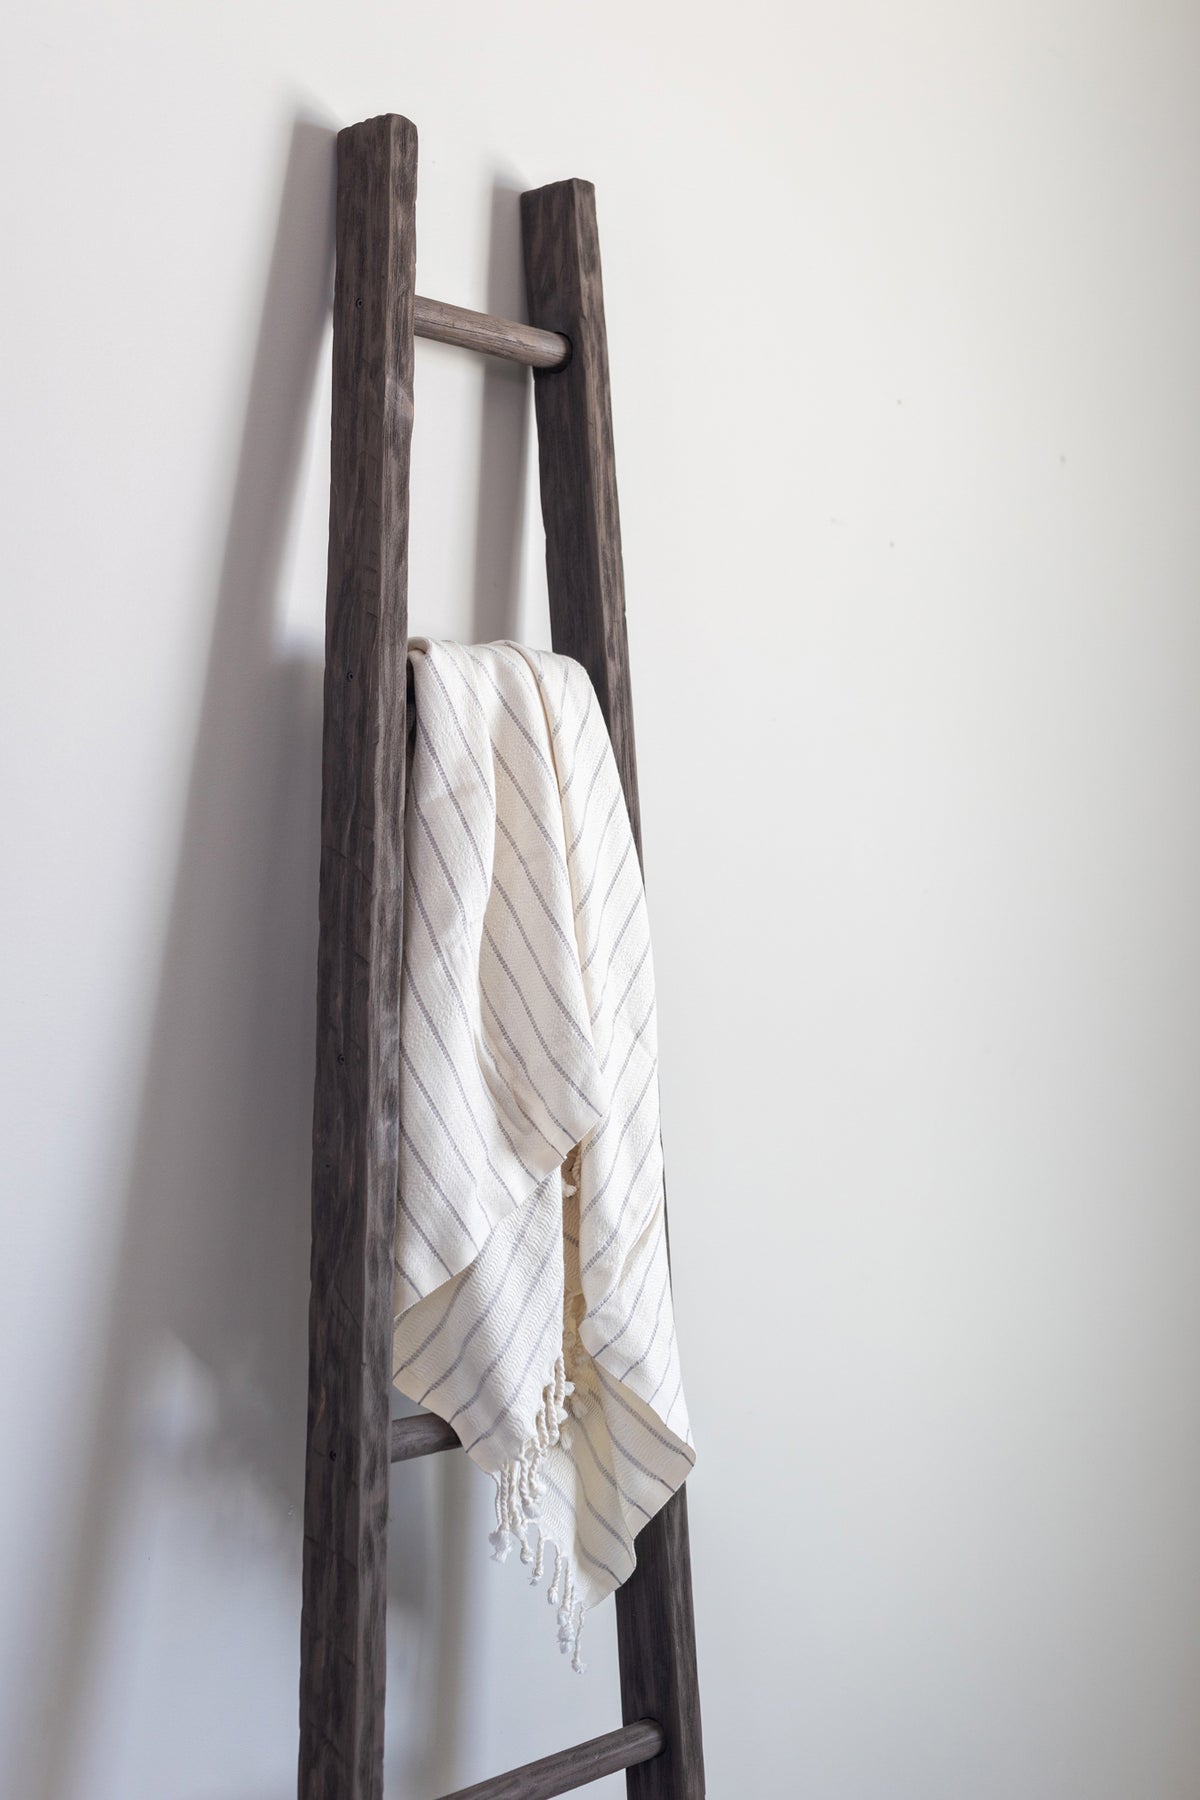 Farmhouse Blanket Ladder with Blanket from the side